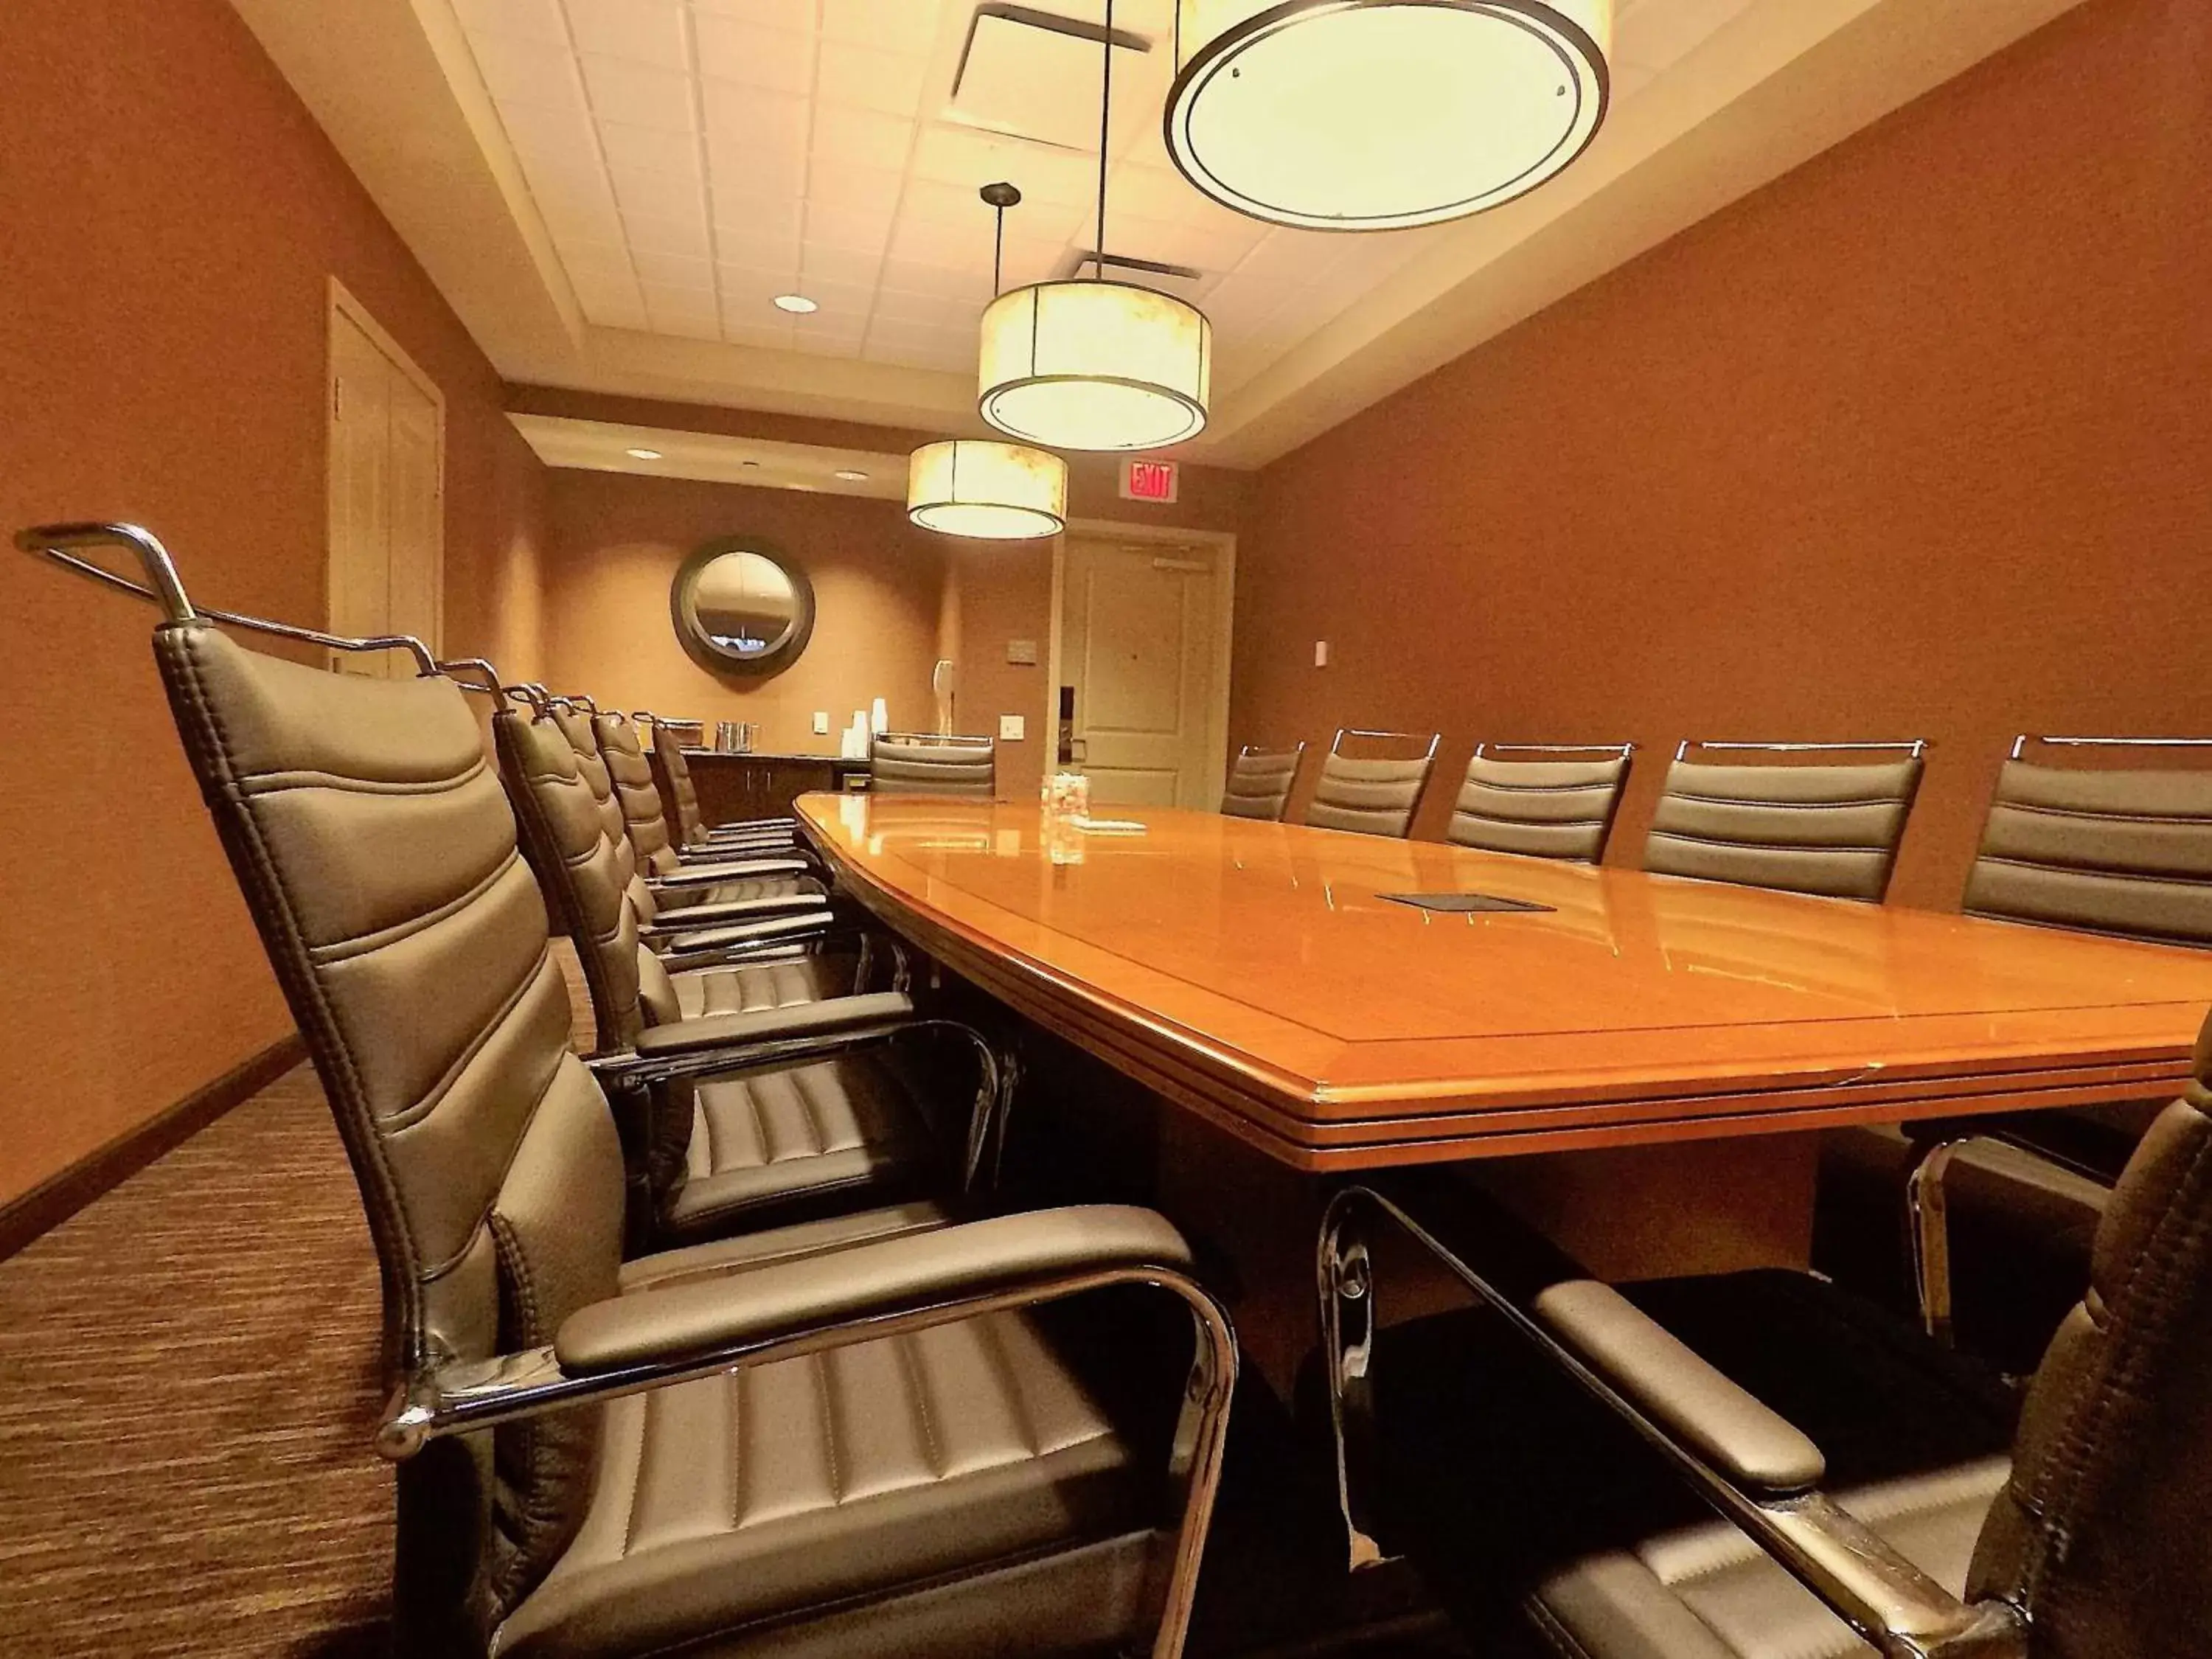 Meeting/conference room in Hilton Garden Inn West Des Moines